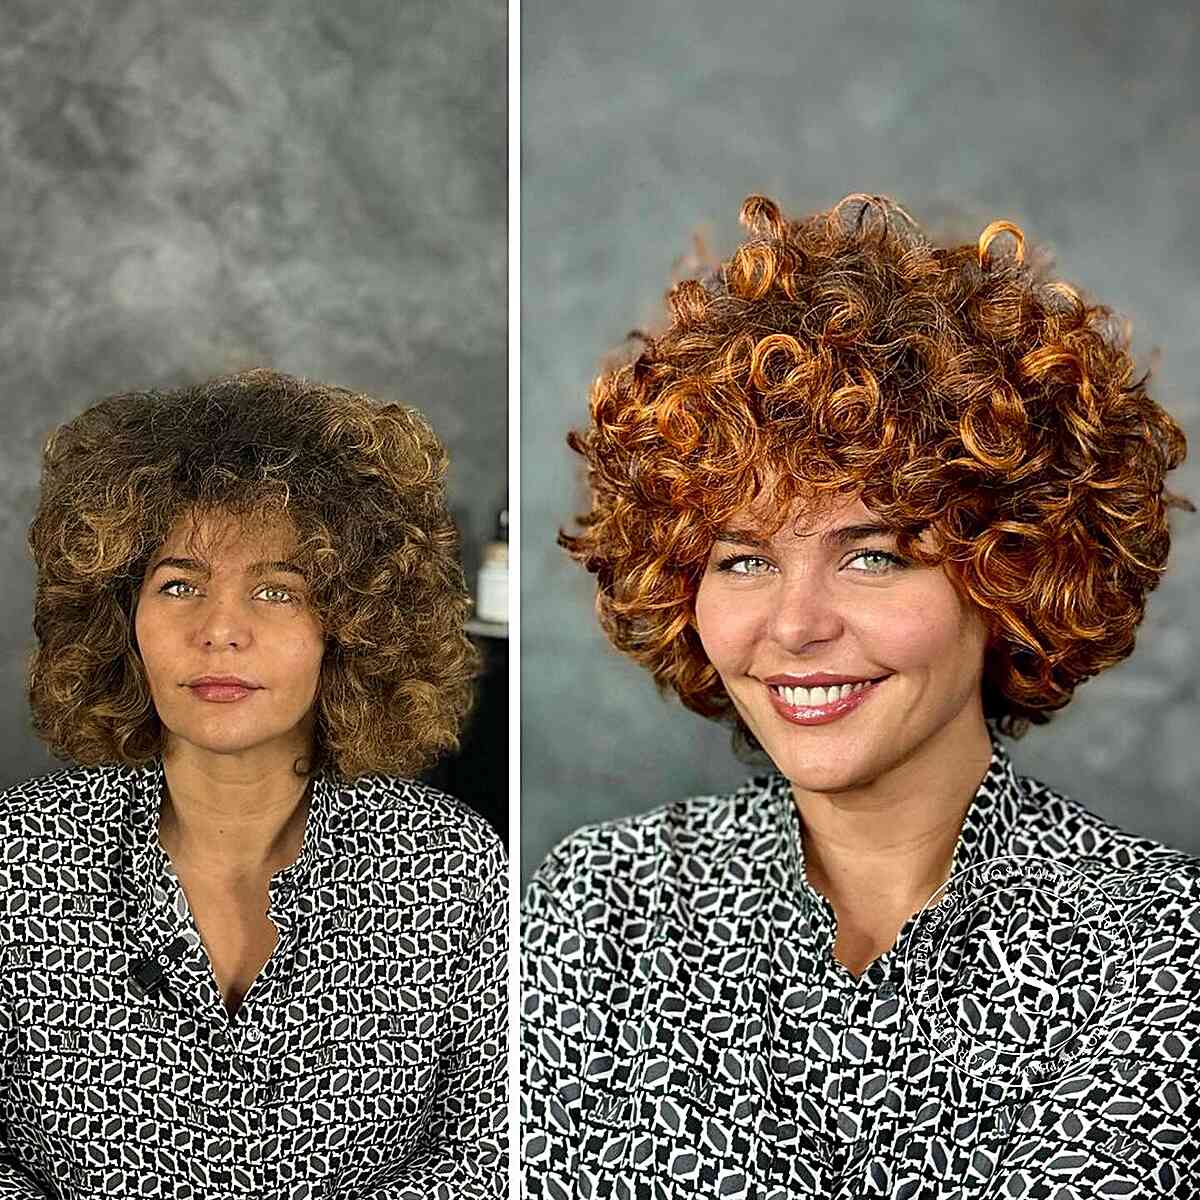 Before and after photos of a woman with a curly round Cadō cut, pre-styling and post-styling, highlighting the vibrant, dimensional red color and voluminous shape